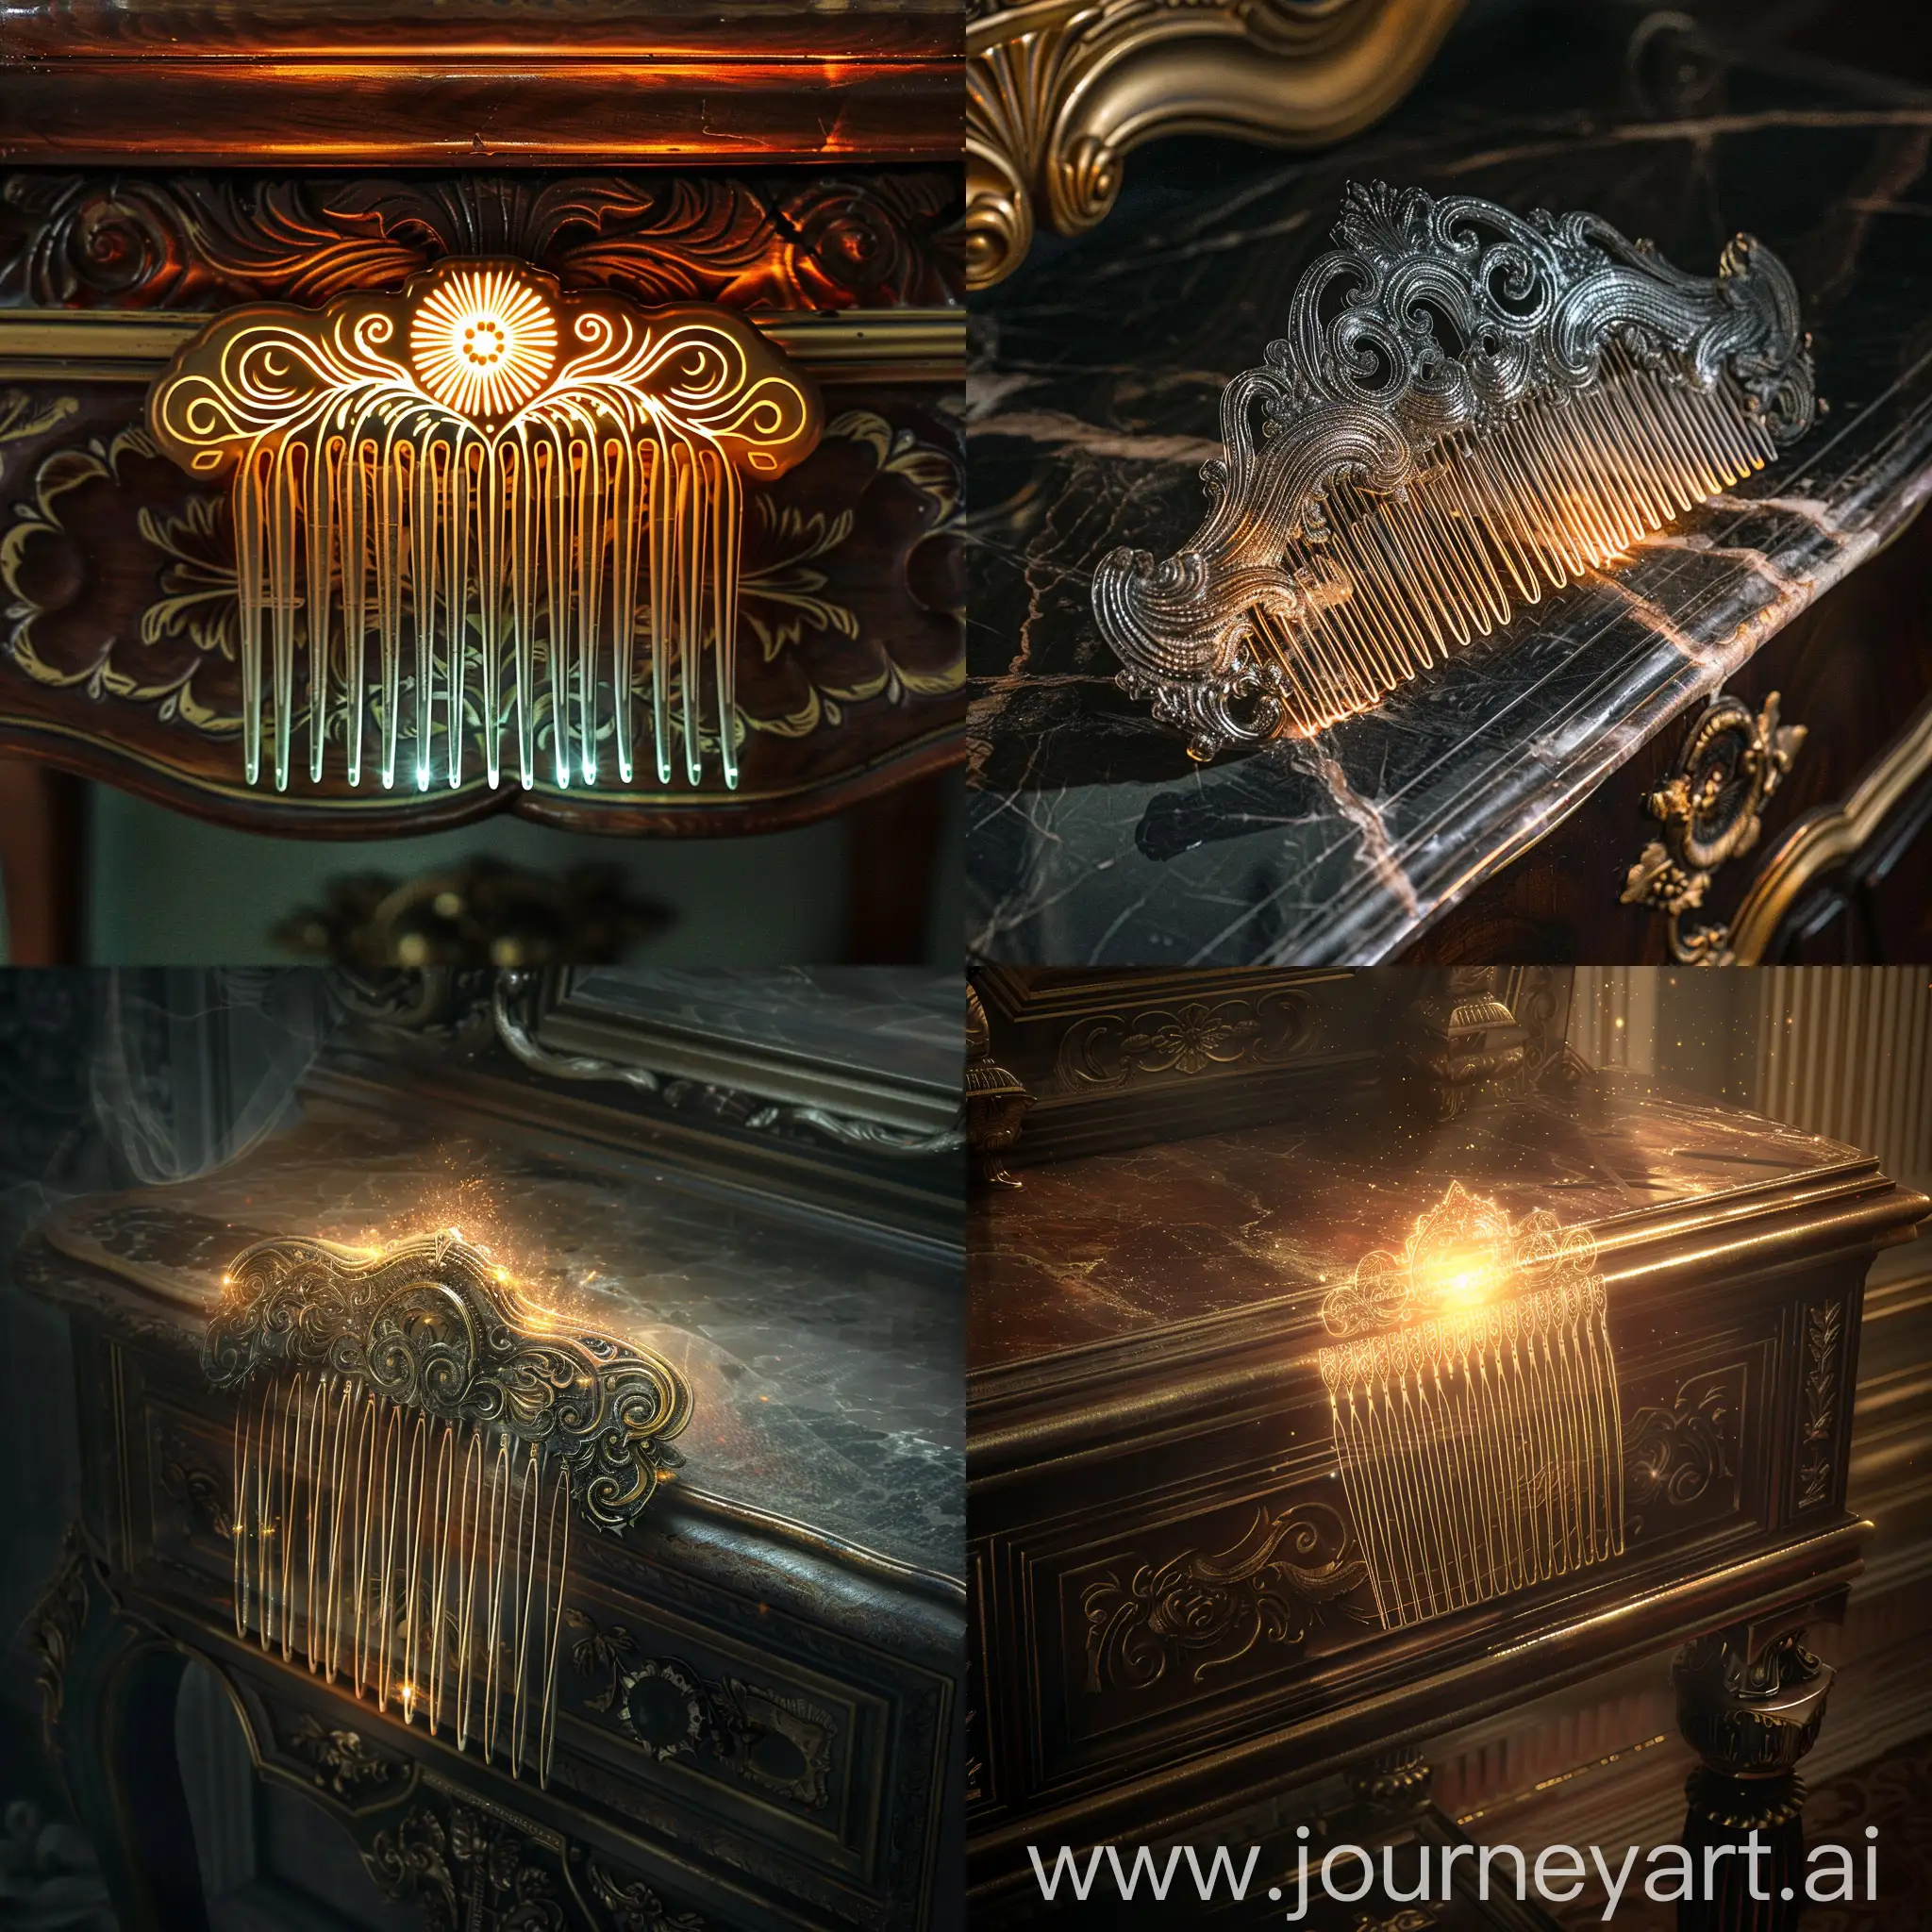 A hauntingly beautiful hair comb, glowing with an otherworldly light, rests upon an ancient vanity, its intricate design hinting at a dark and mysterious past.